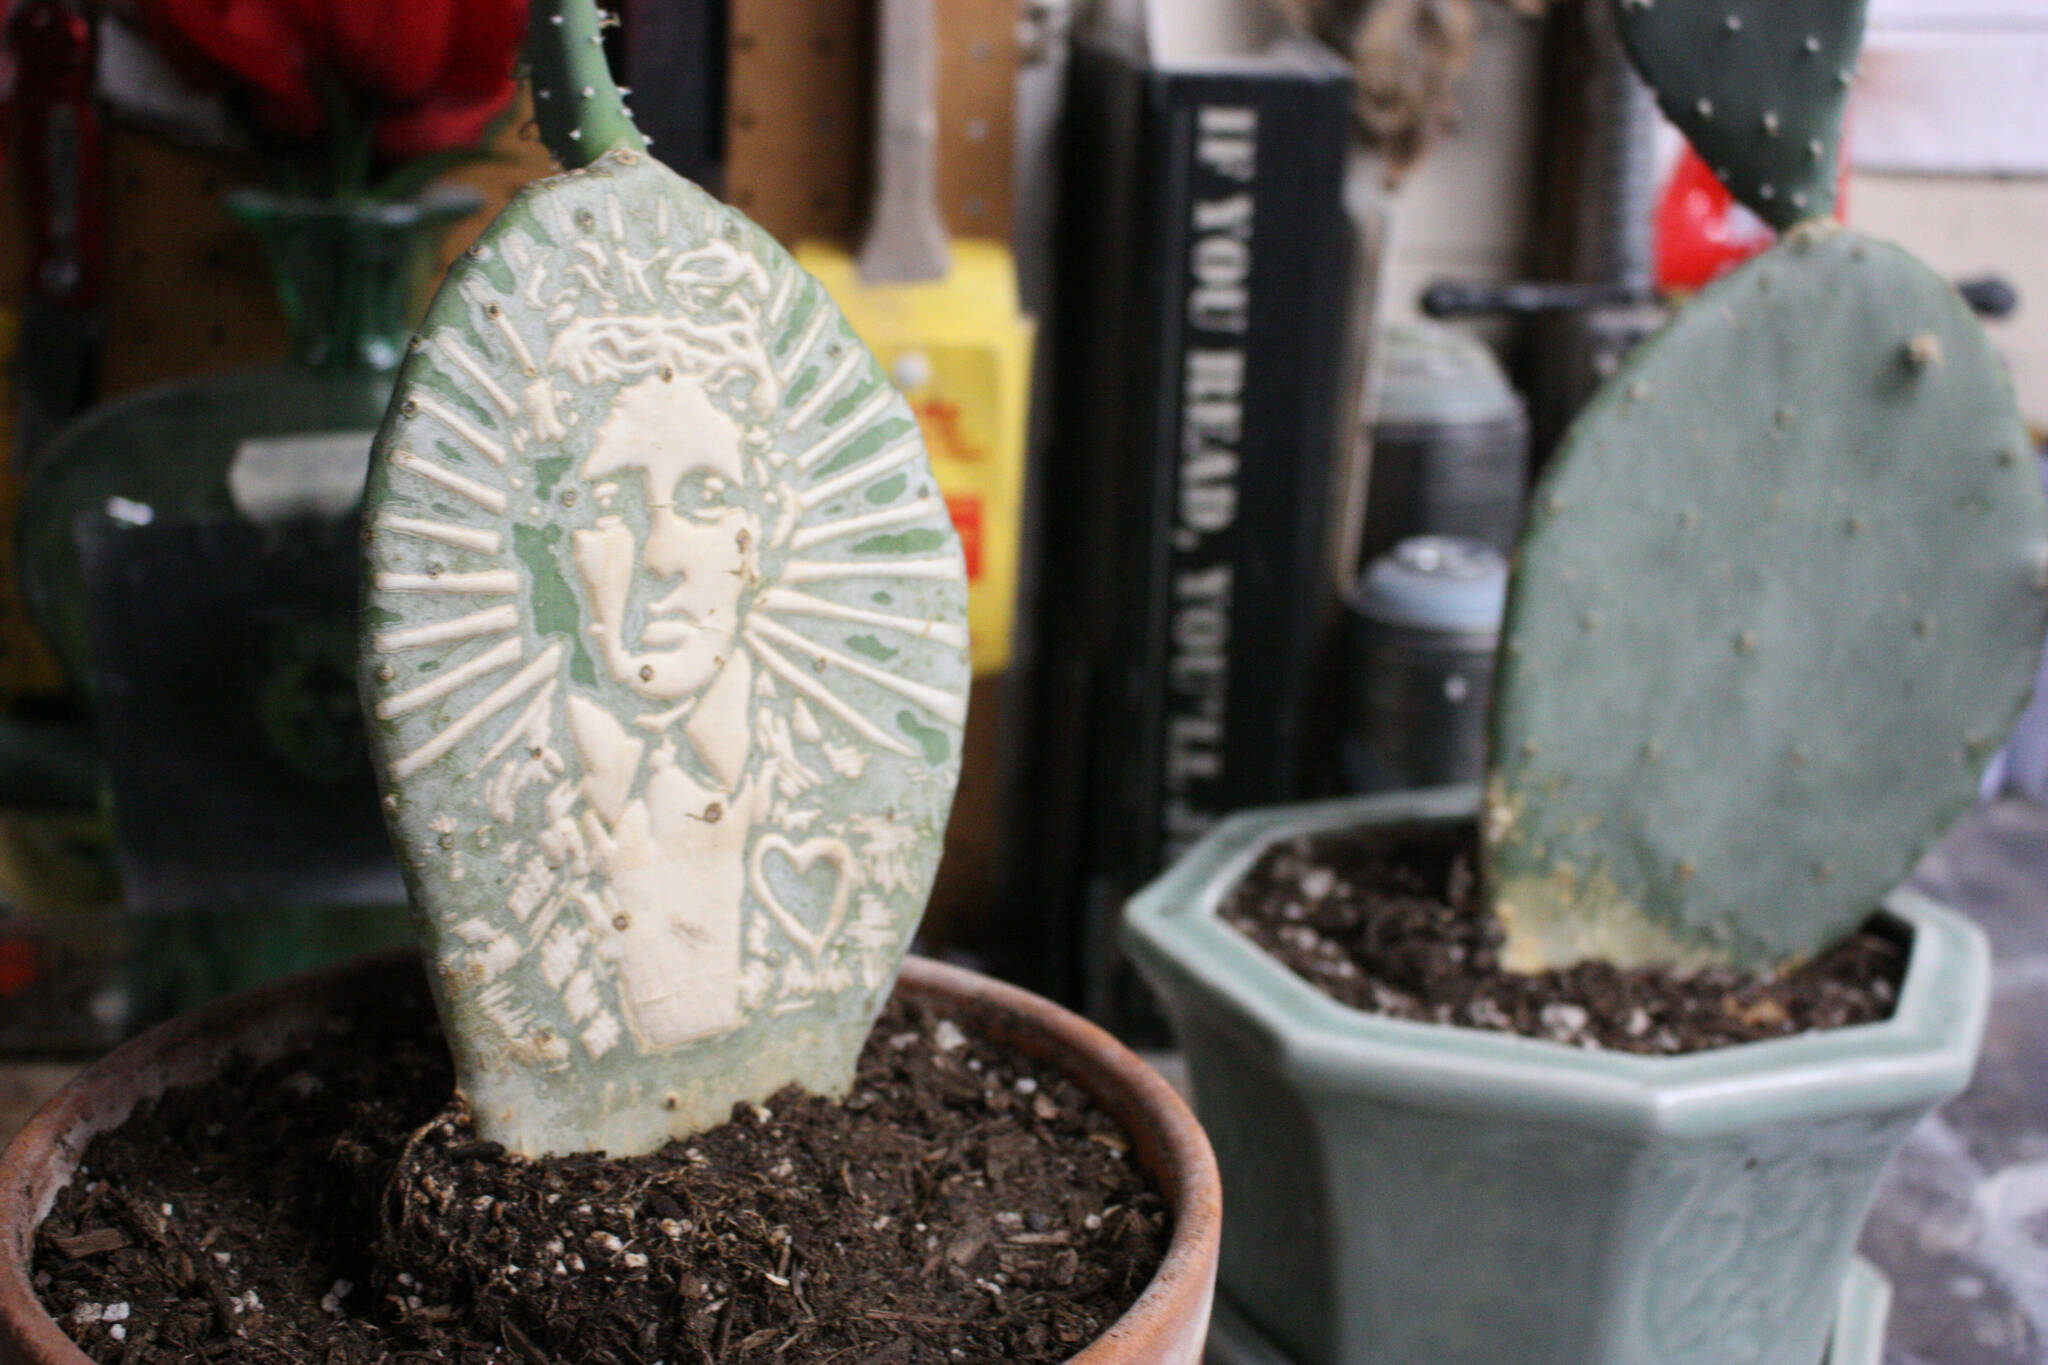 A cactus that Codd has etched his logo into with a laser cutter (photo by Cameron Sheppard)